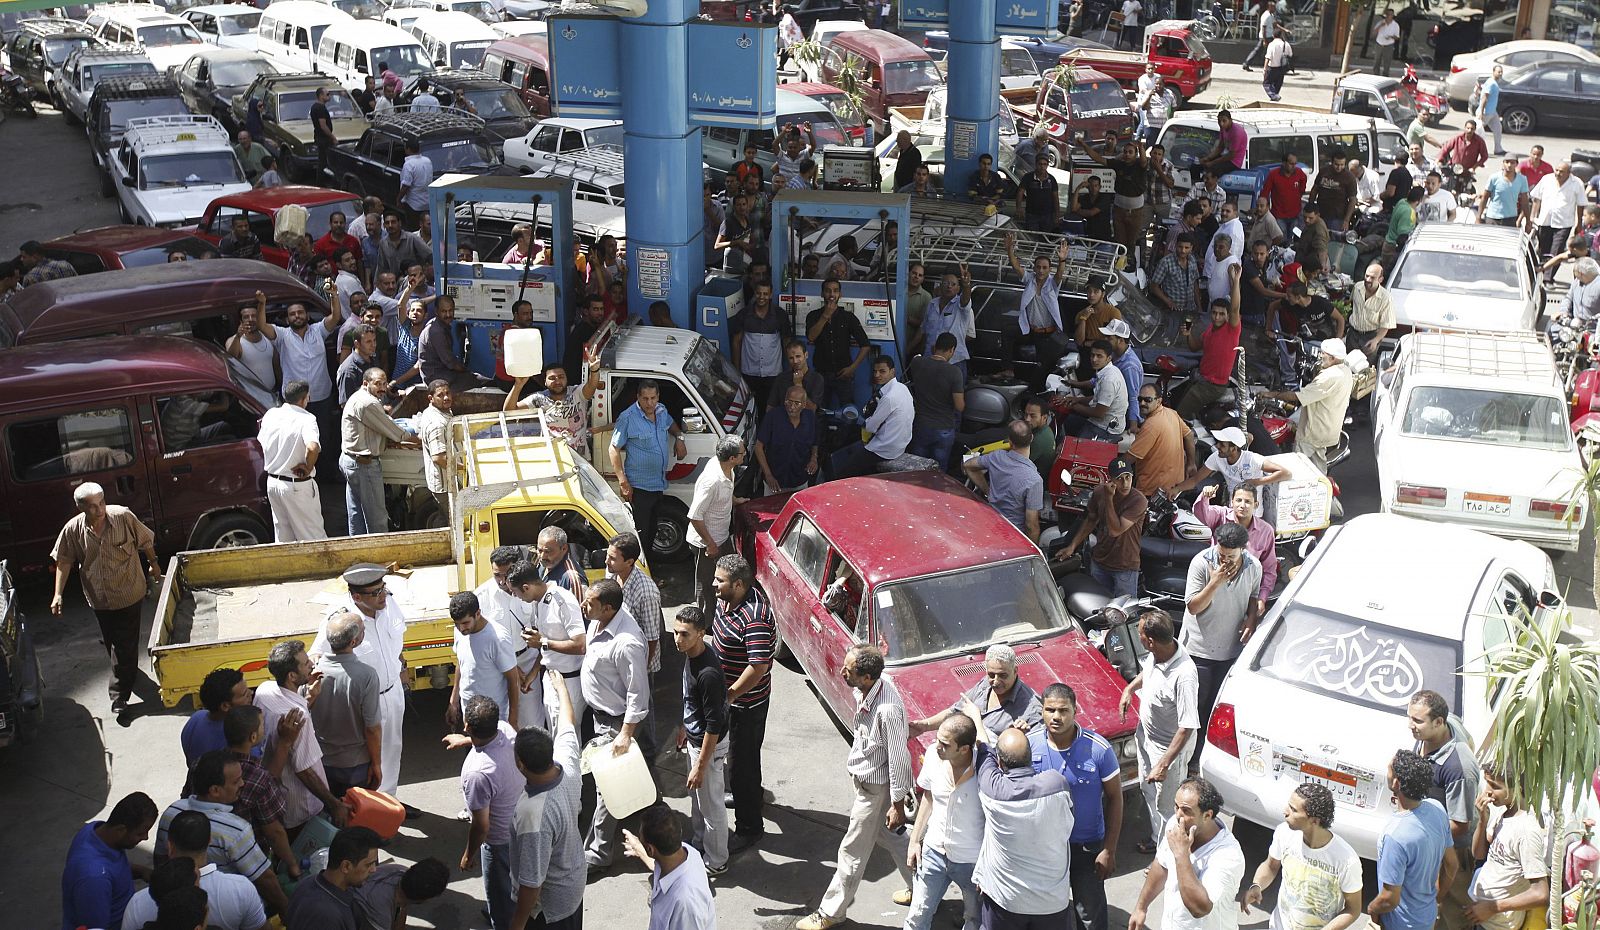 People crowd around a petrol station during a fuel shortage in Cairo